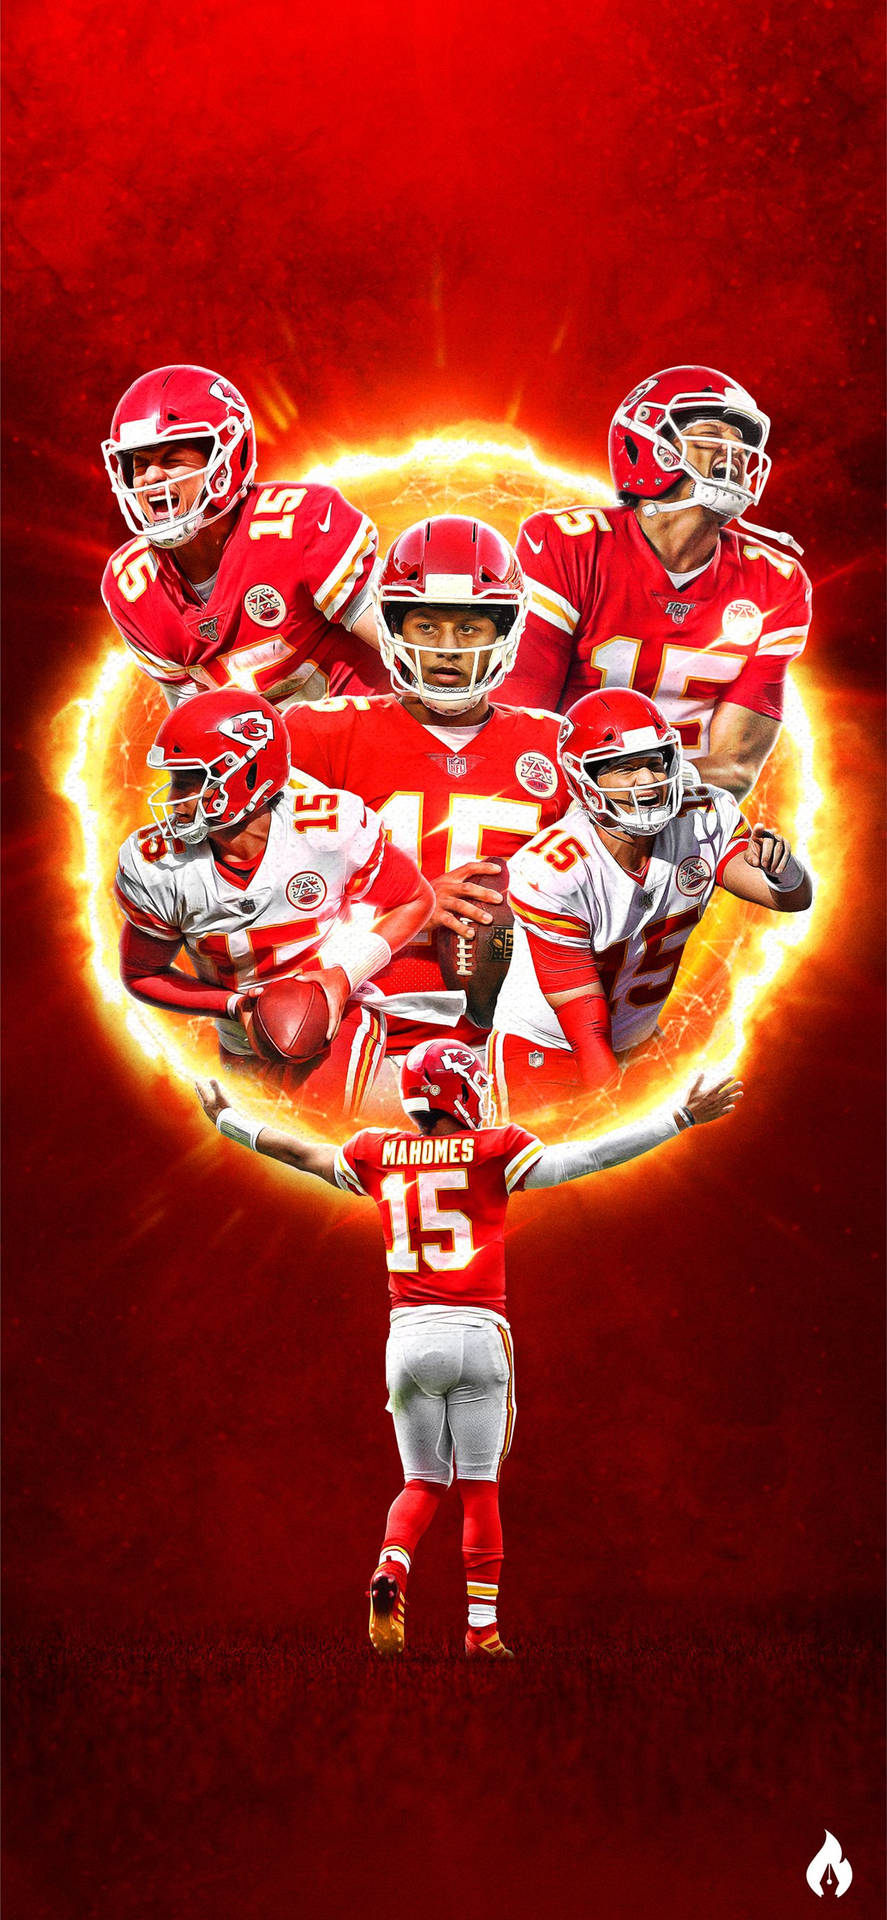 Show your pride for the Kansas City Chiefs with this cool image. Wallpaper